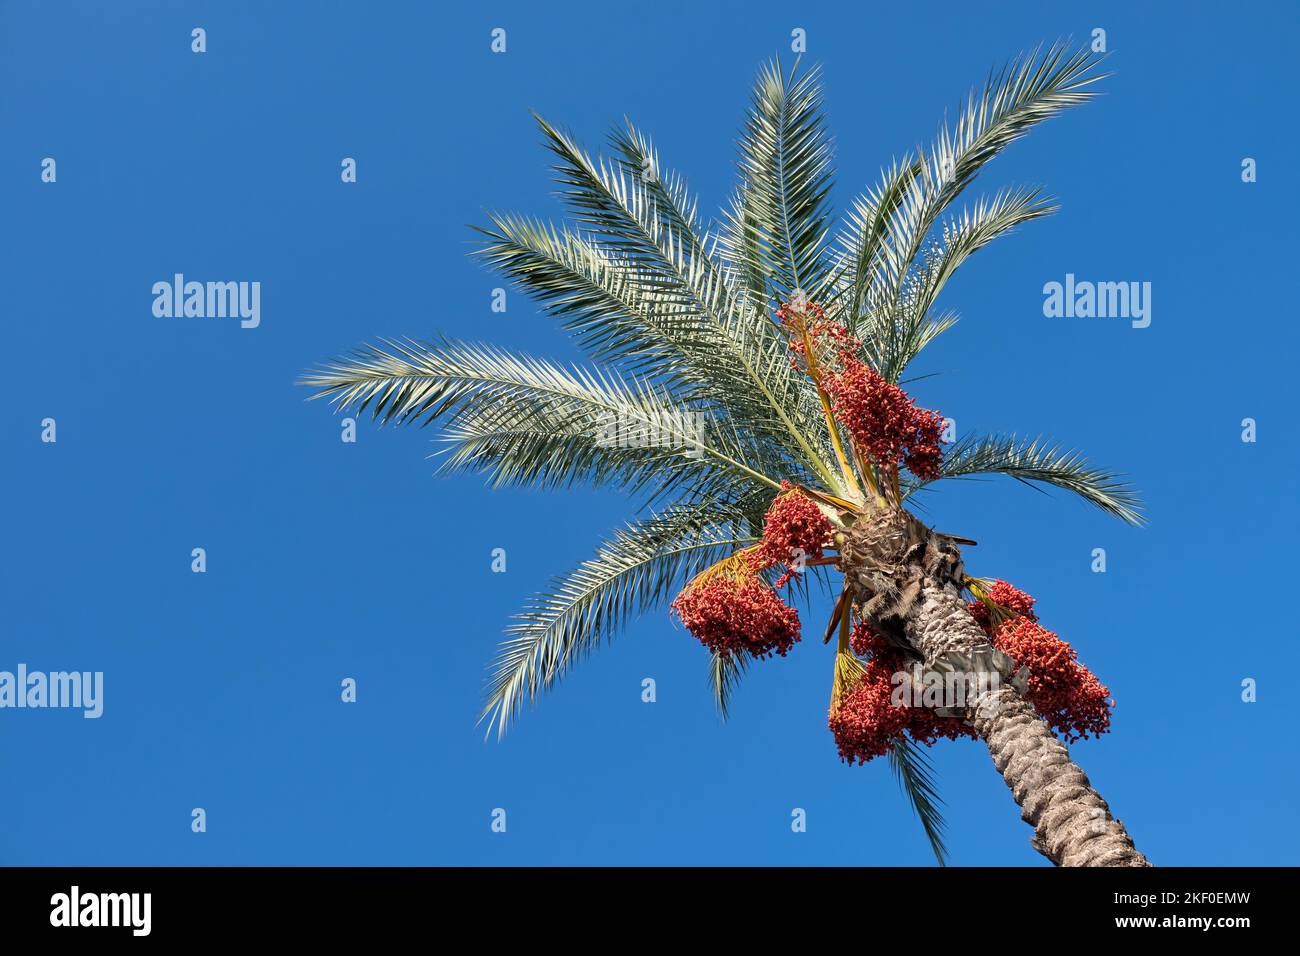 Low Angle Shot Of Dates On A Date Palm Tree Stock Photo